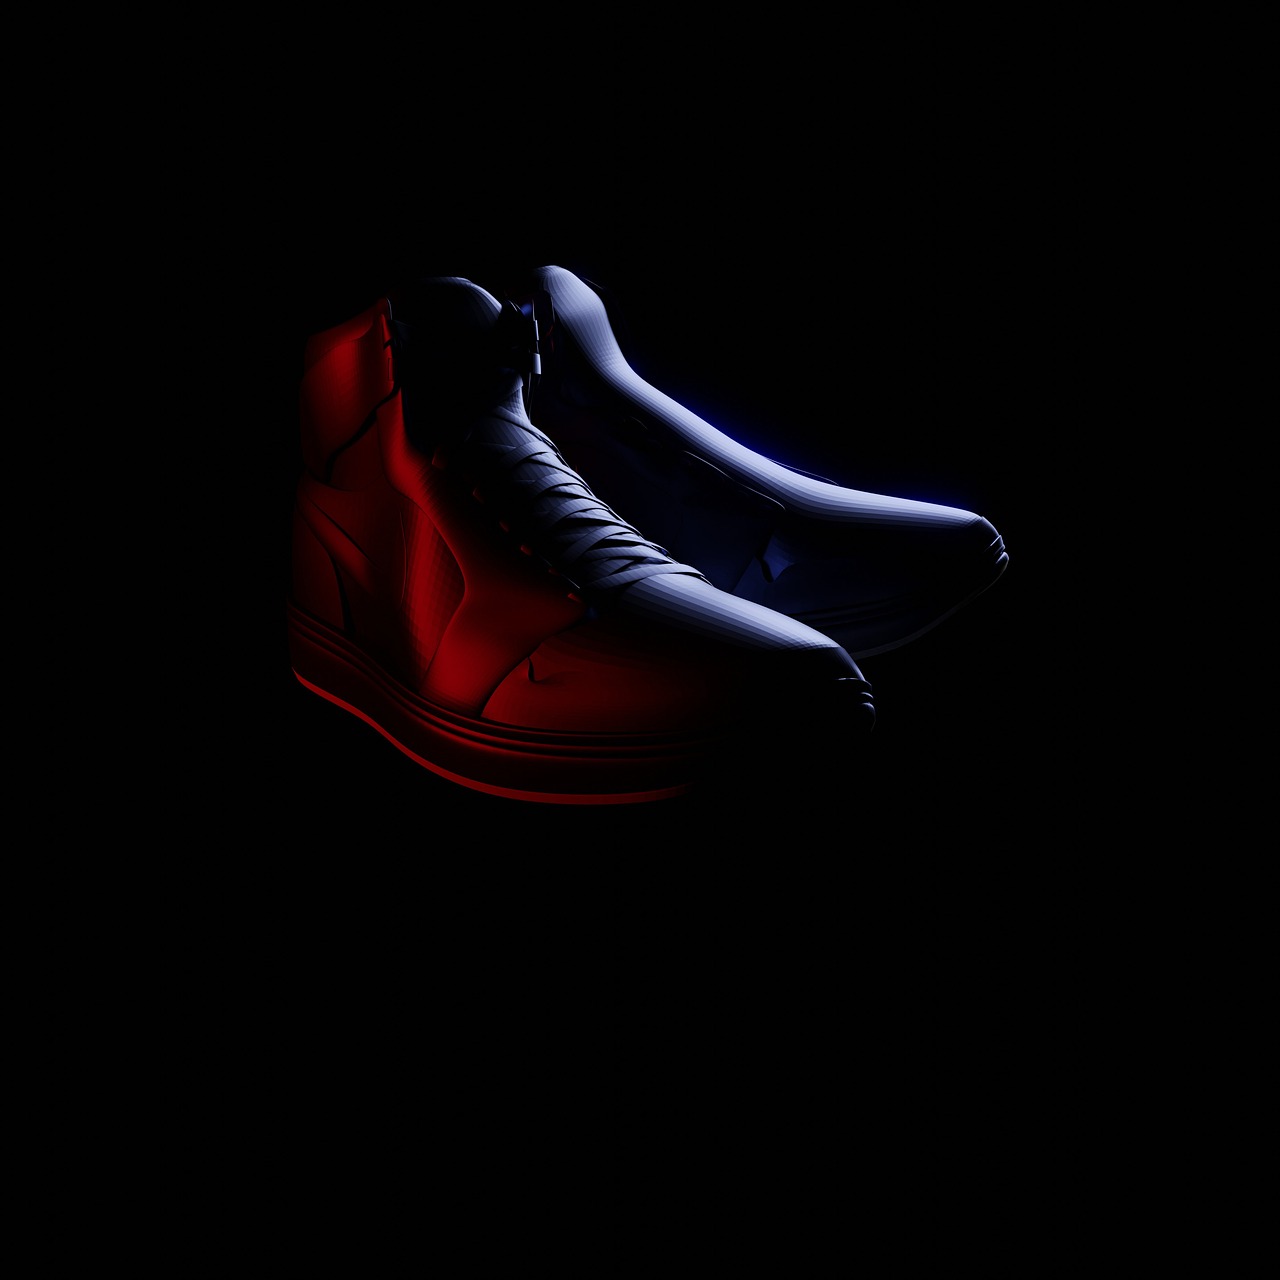 a pair of red and blue shoes in the dark, a 3D render, digital art, 4k vertical wallpaper, patent leather, sneaker design, hyperrealistic image